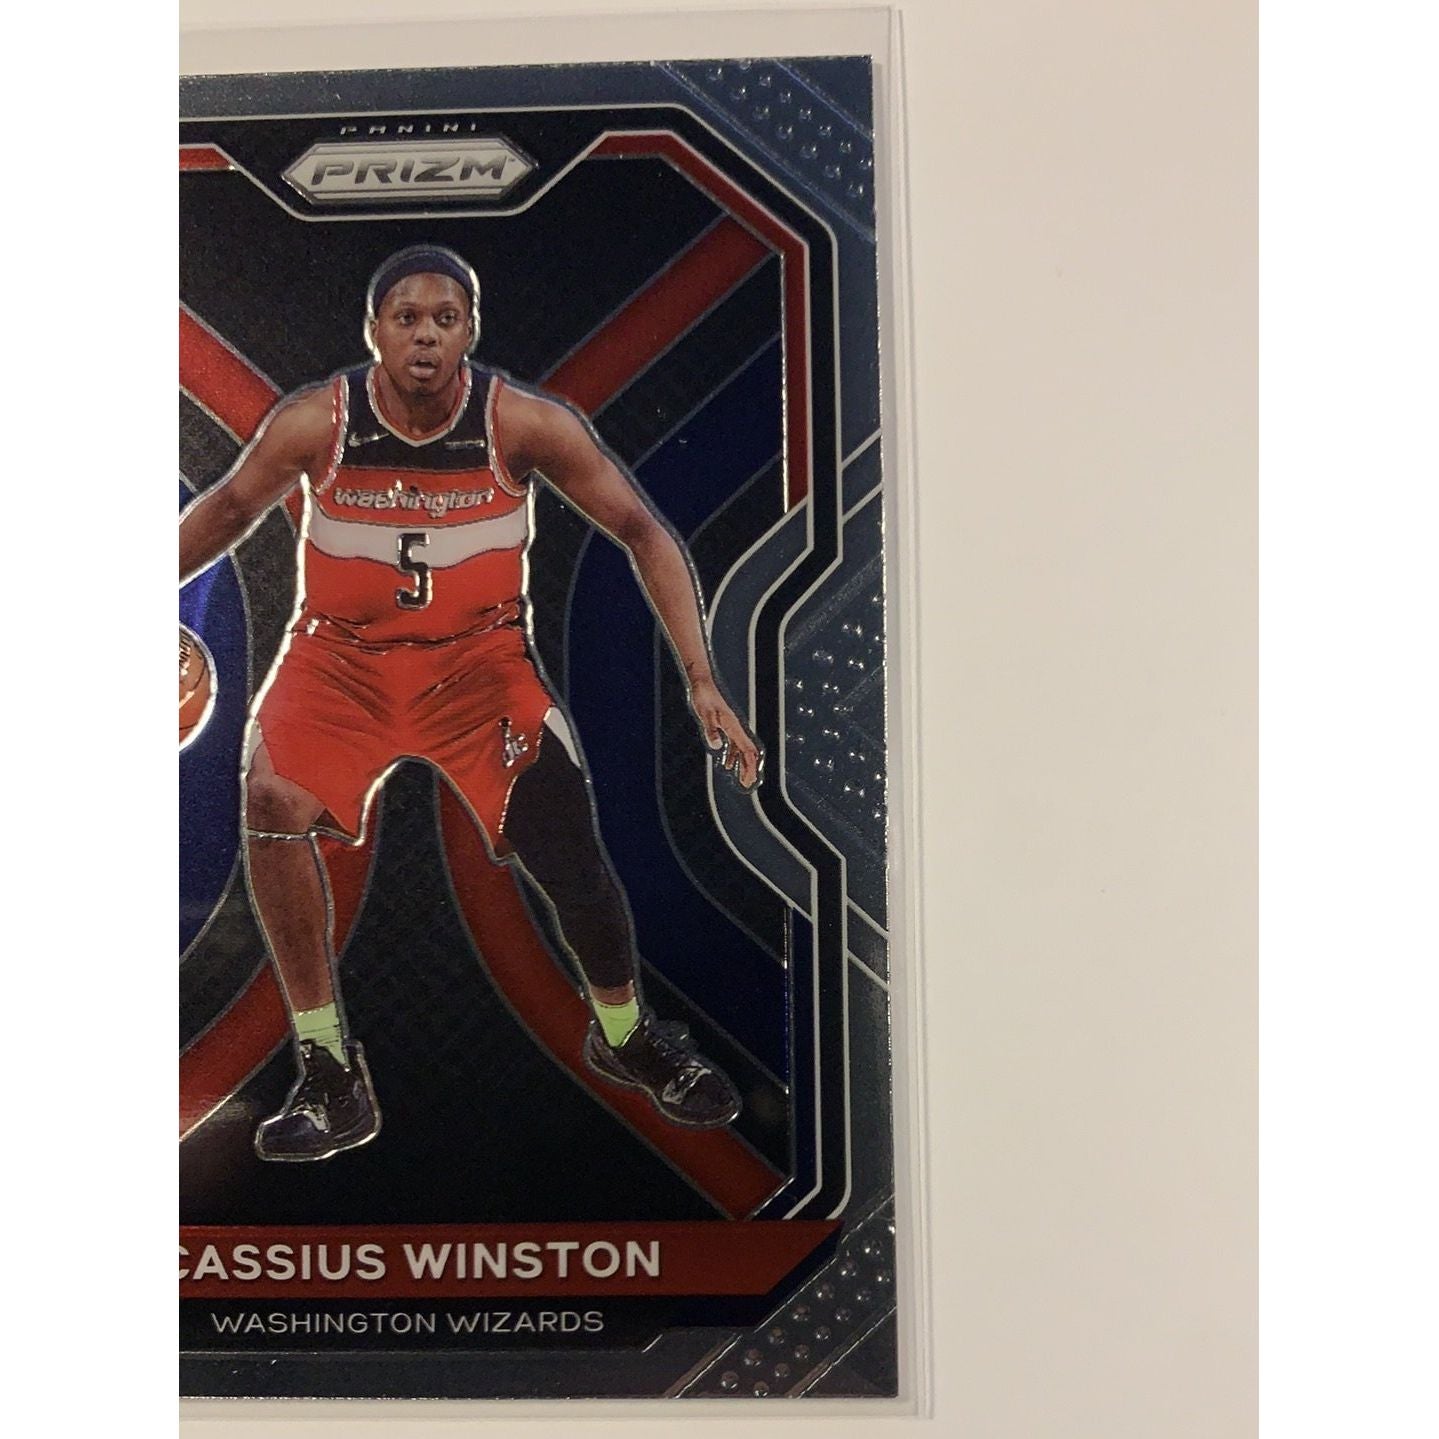  2020-21 Panini Prizm Cassius Winston Rookie Card  Local Legends Cards & Collectibles